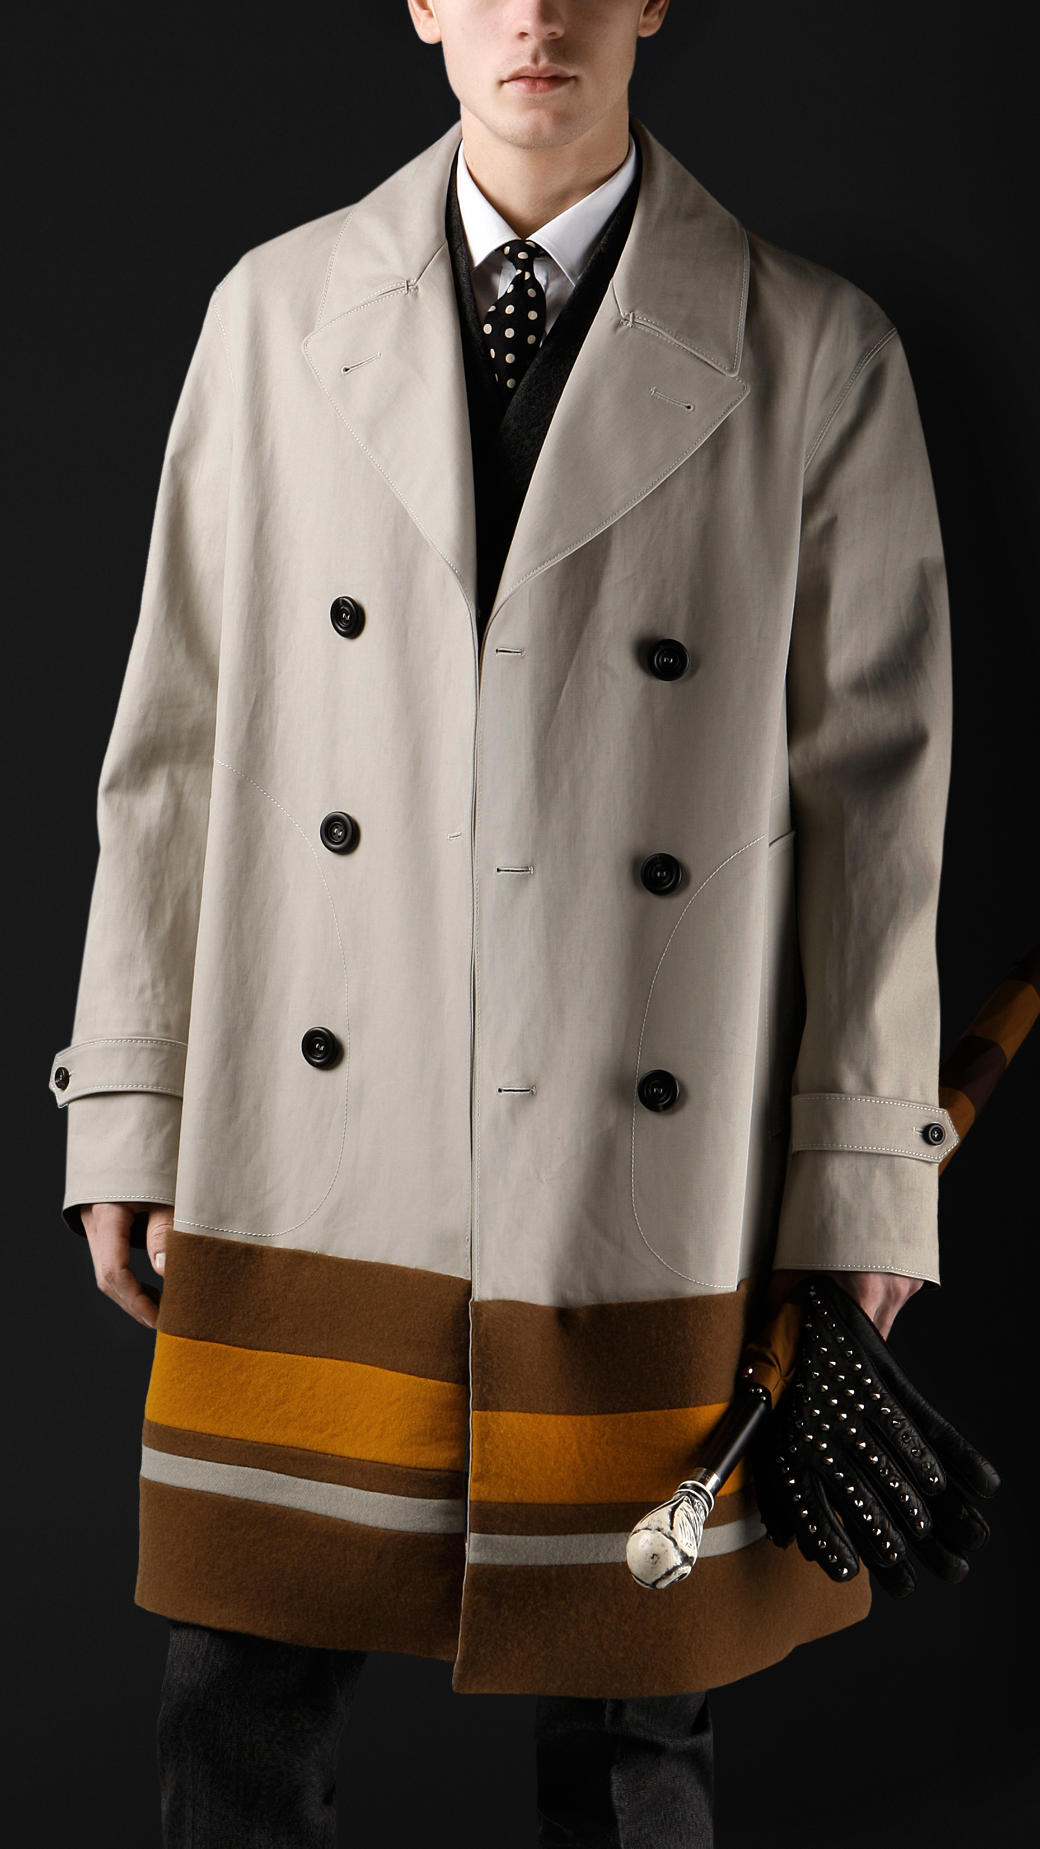 Lyst - Burberry Prorsum Oversize College Stripe Trench Coat in Natural ...